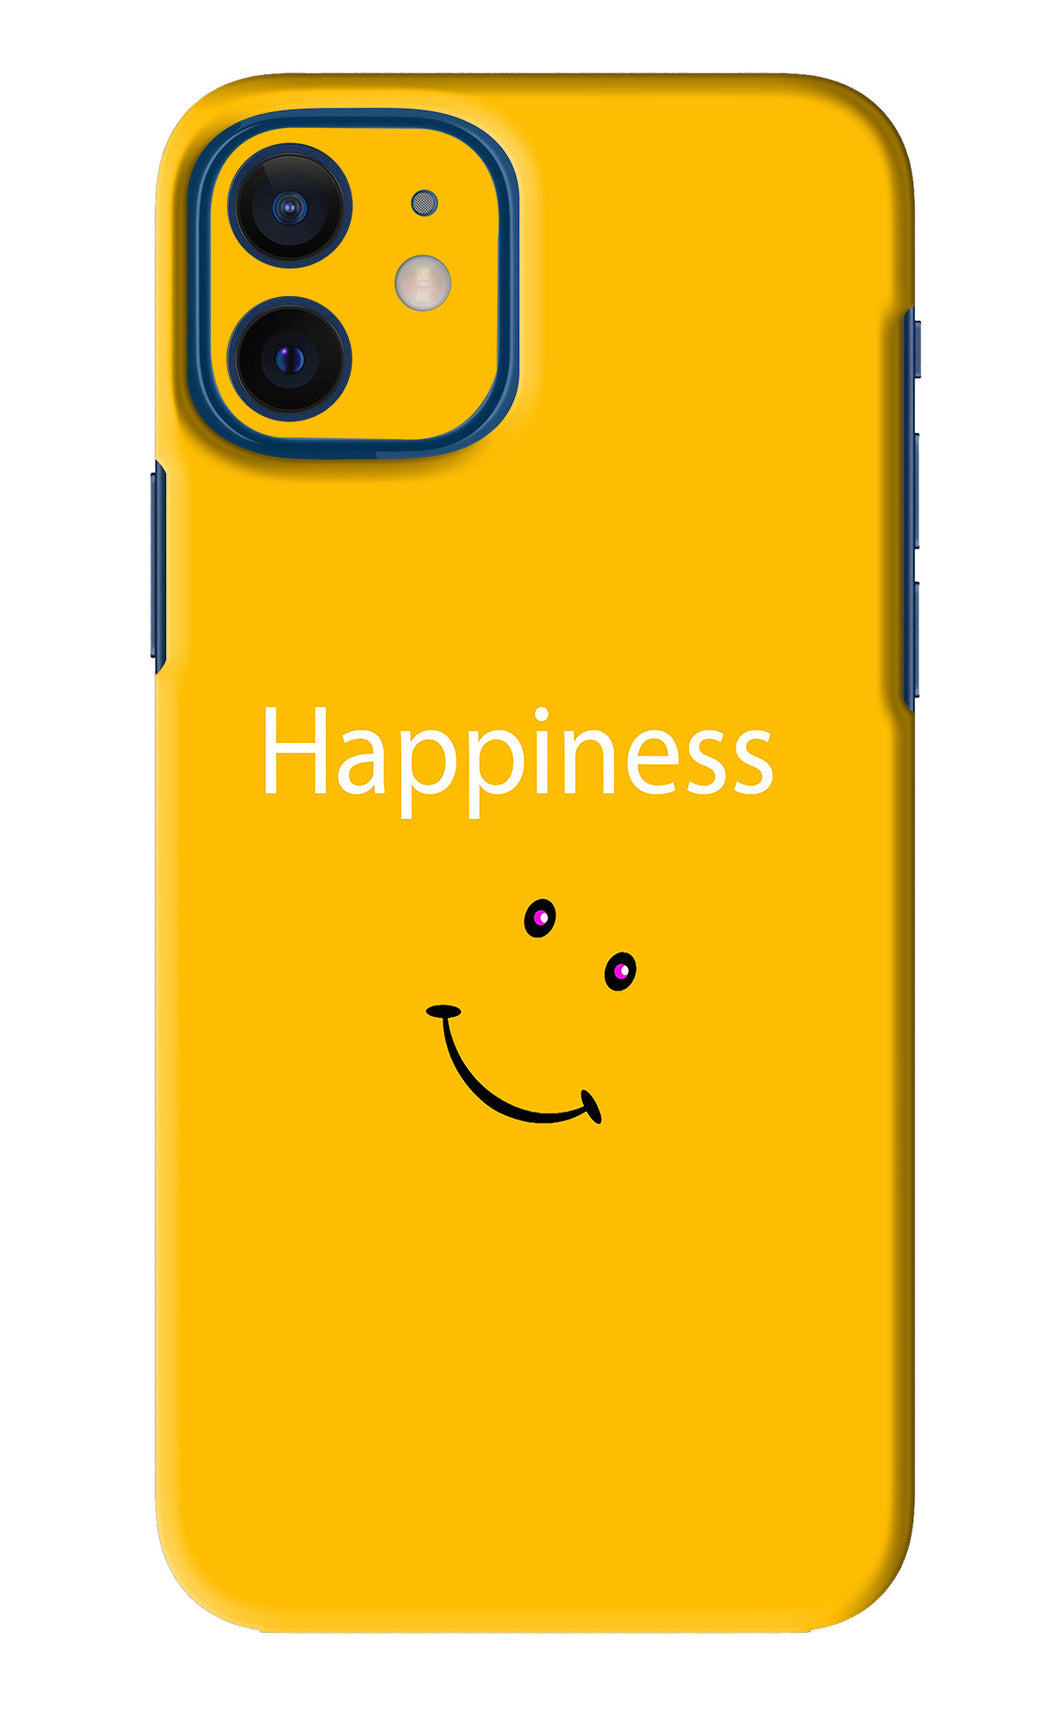 Happiness With Smiley iPhone 12 Back Skin Wrap